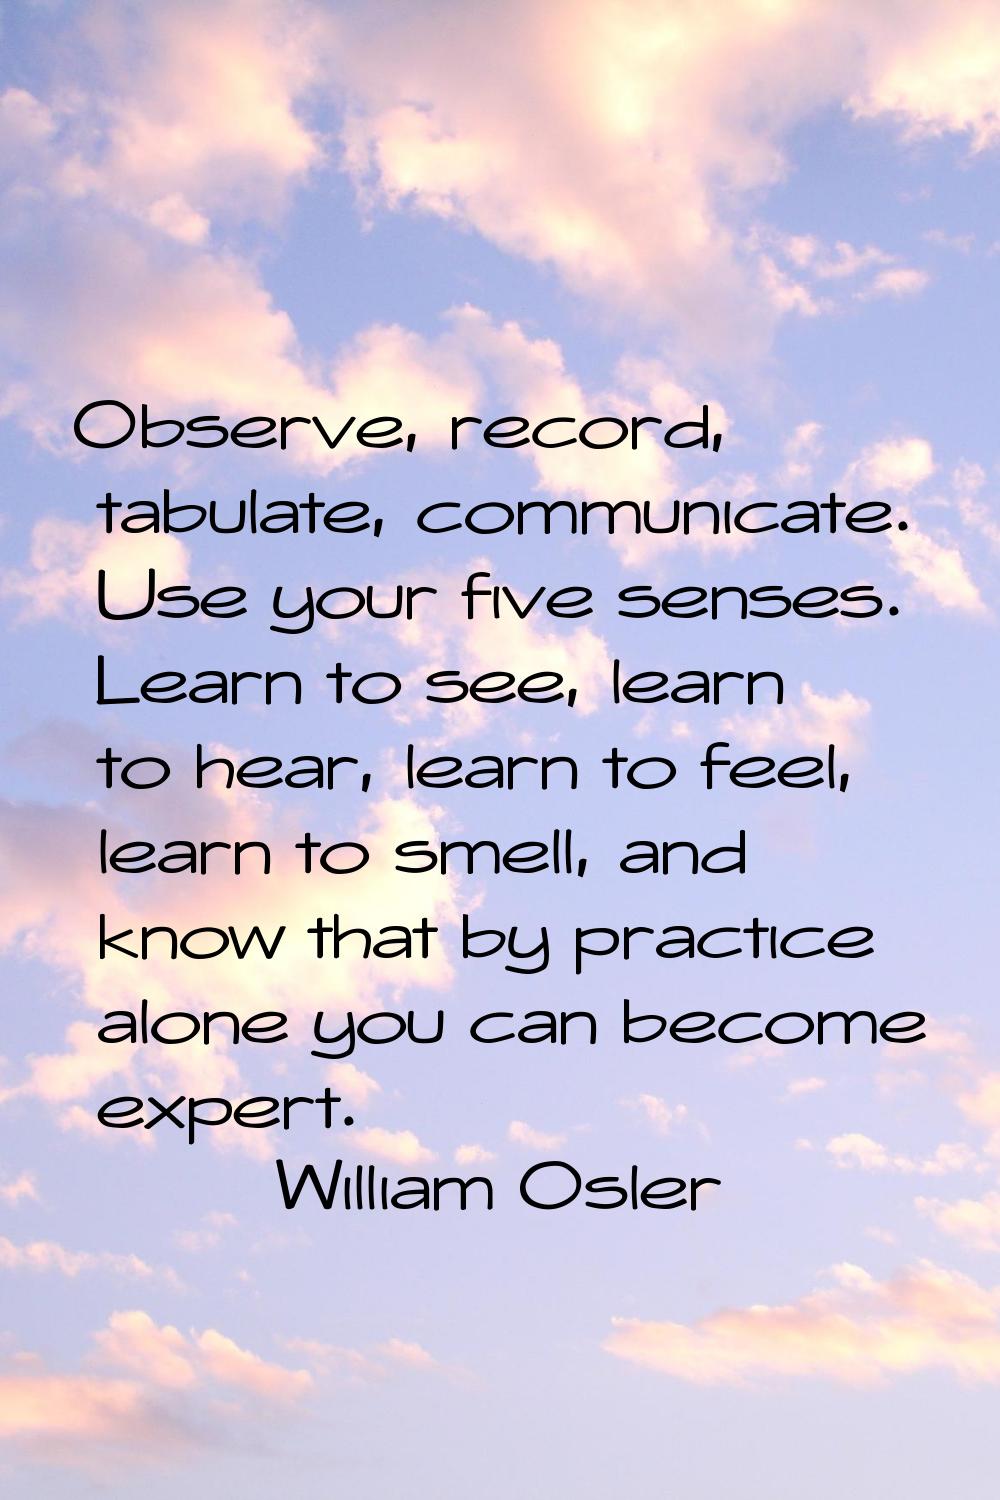 Observe, record, tabulate, communicate. Use your five senses. Learn to see, learn to hear, learn to